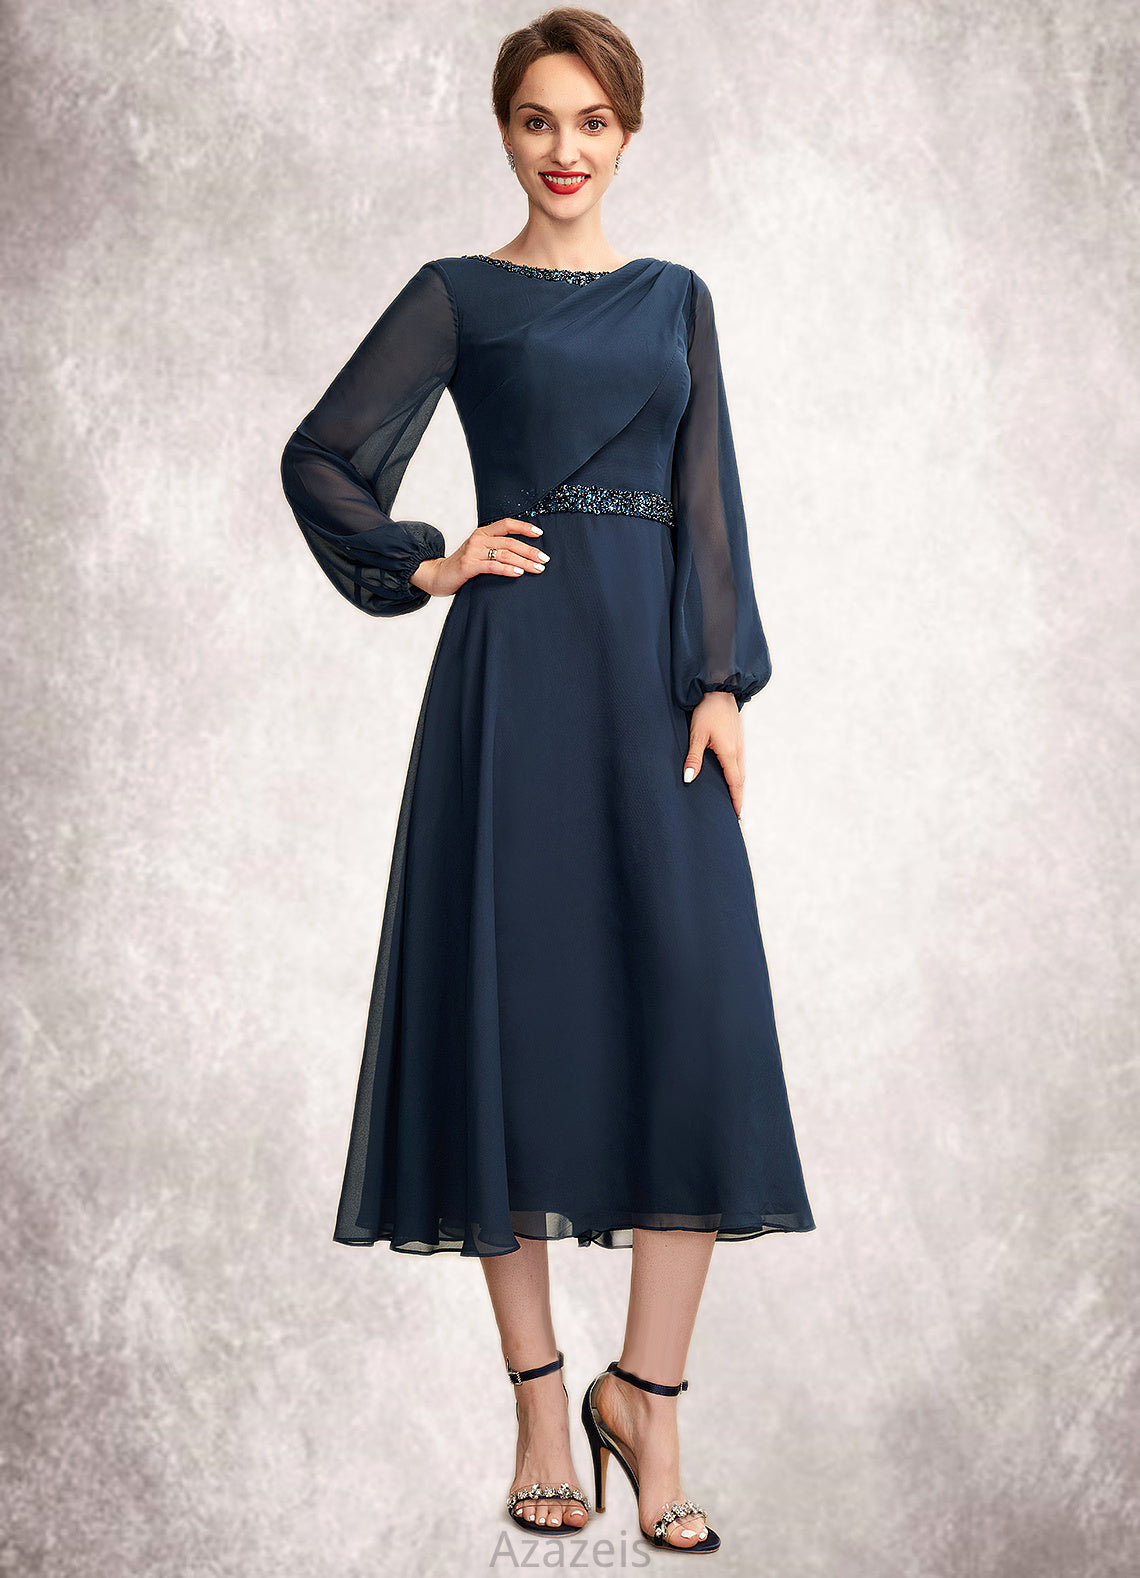 Chelsea A-Line Scoop Neck Tea-Length Chiffon Mother of the Bride Dress With Beading Sequins DF126P0015018